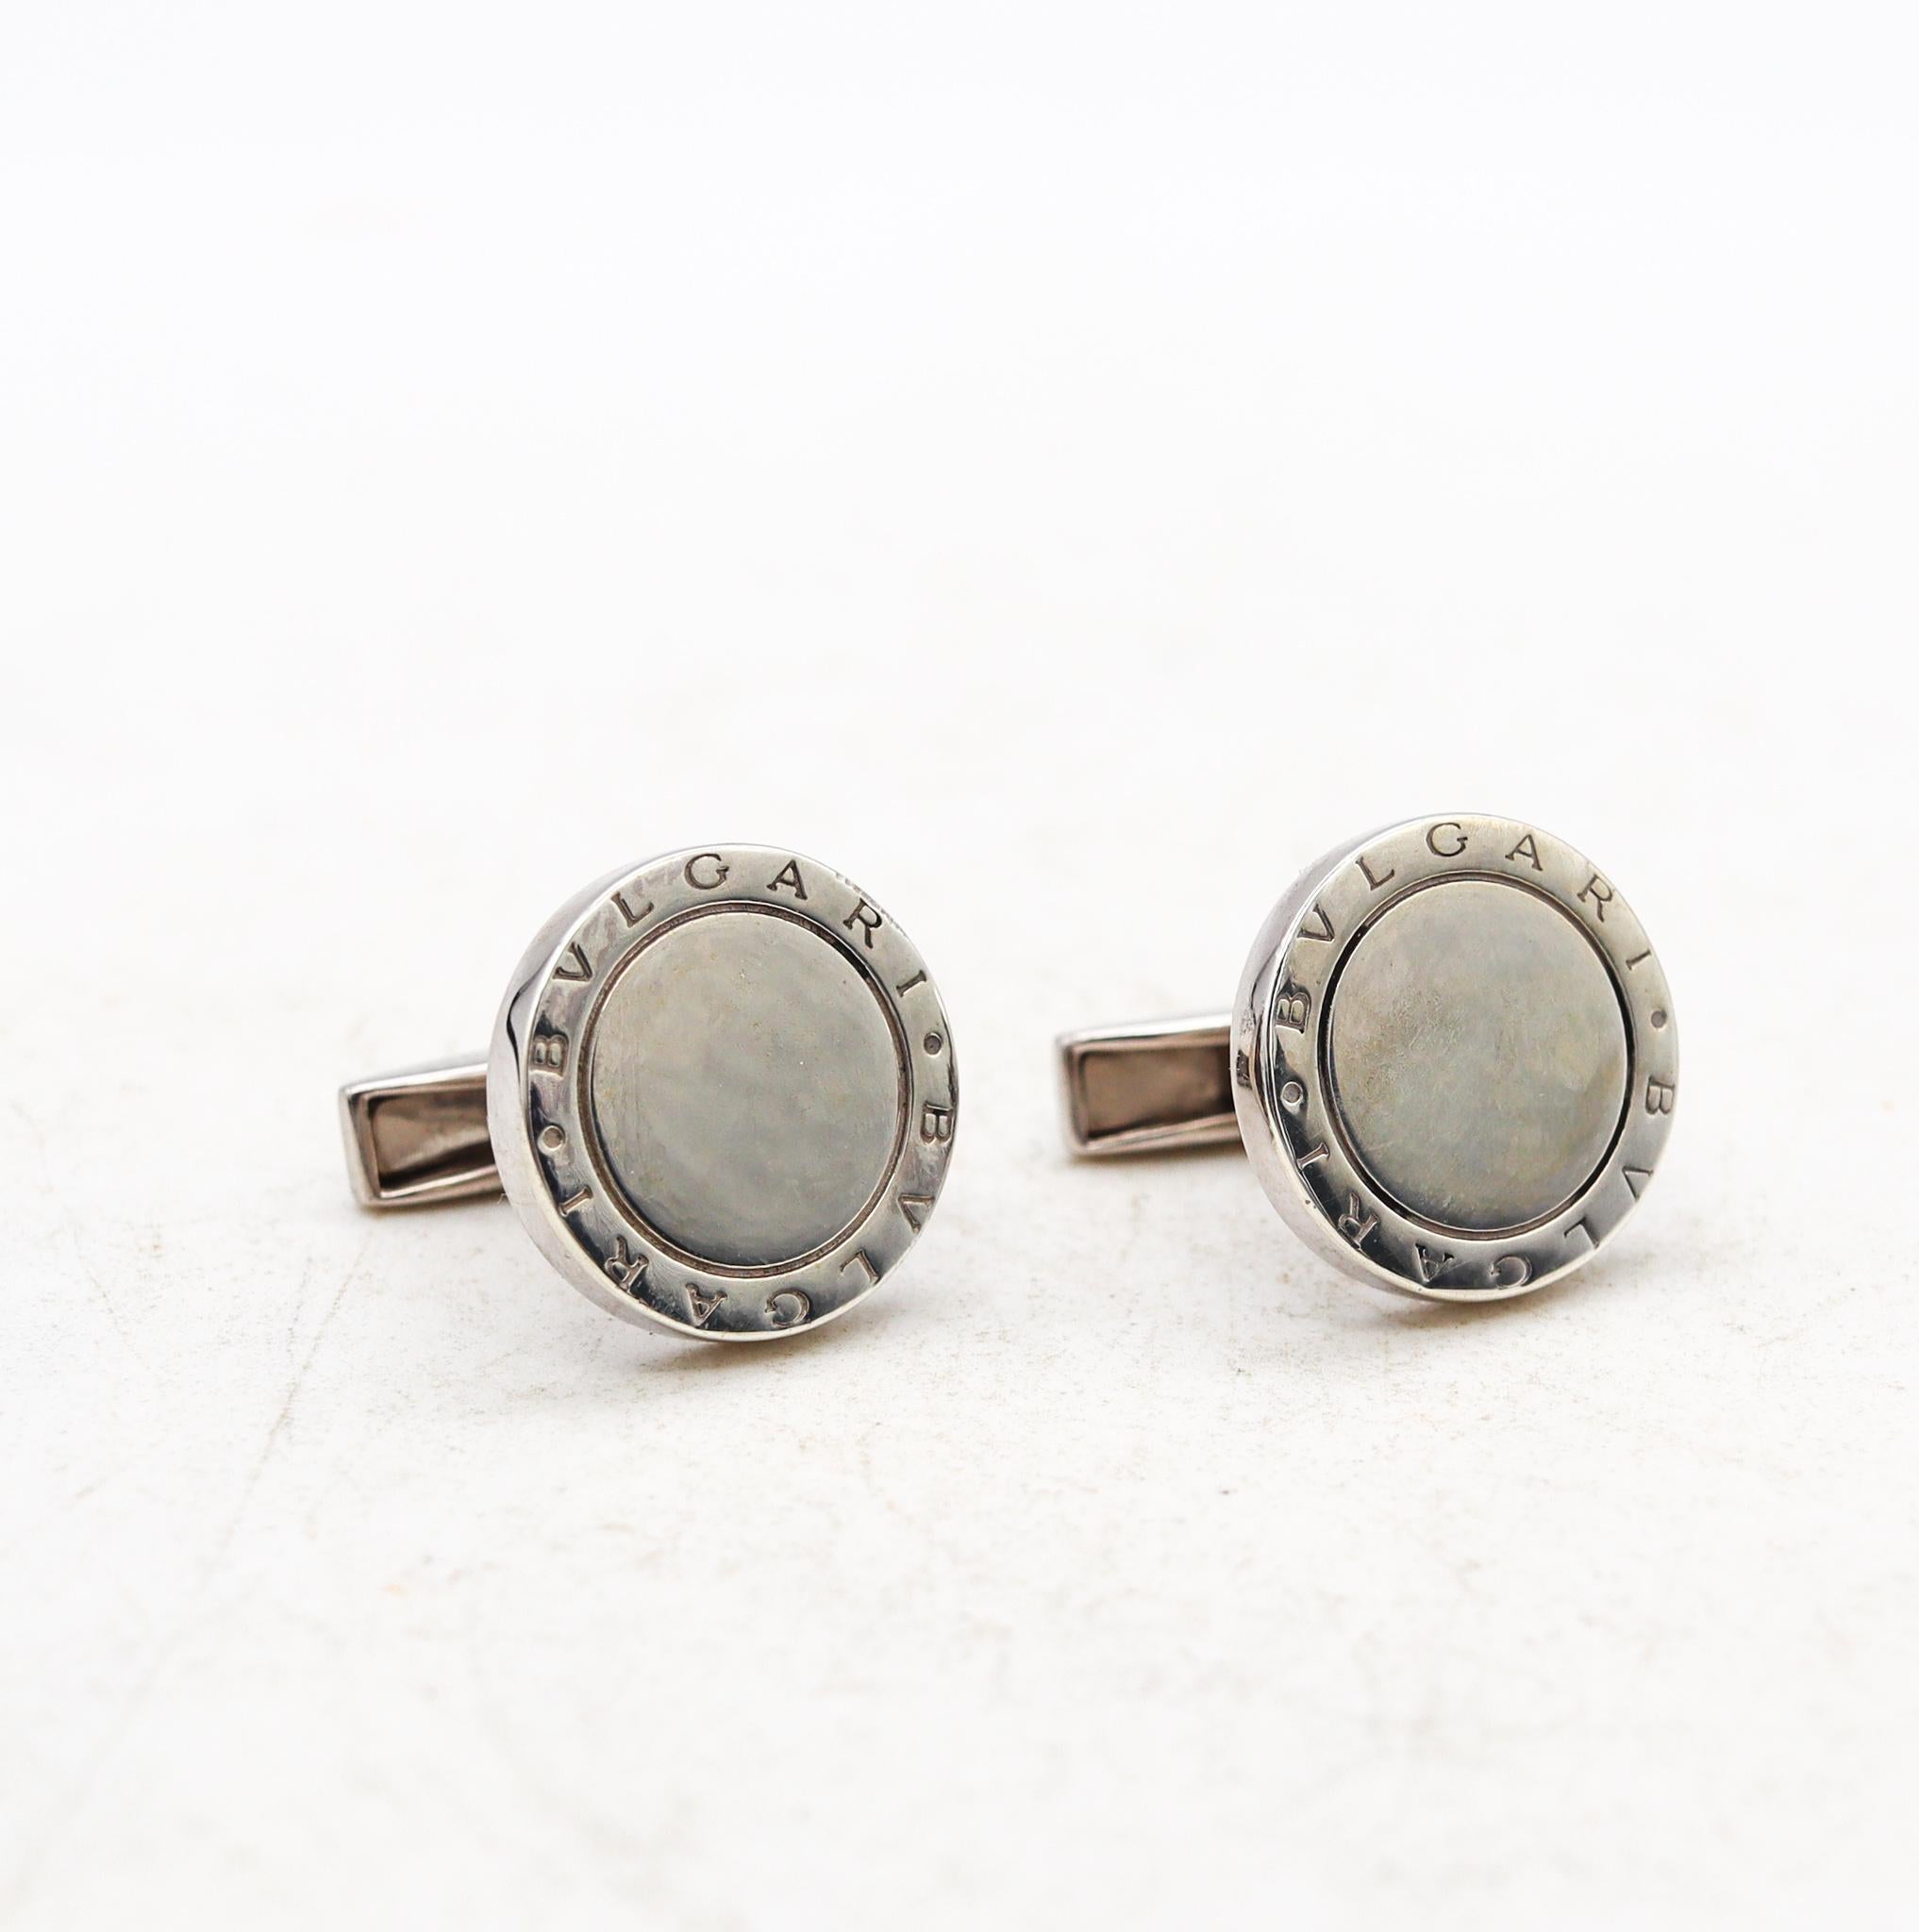 Contemporary Bvlgari Roma Vintage Pair Of Toggle Round Cufflinks Solid .925 Sterling Silver For Sale